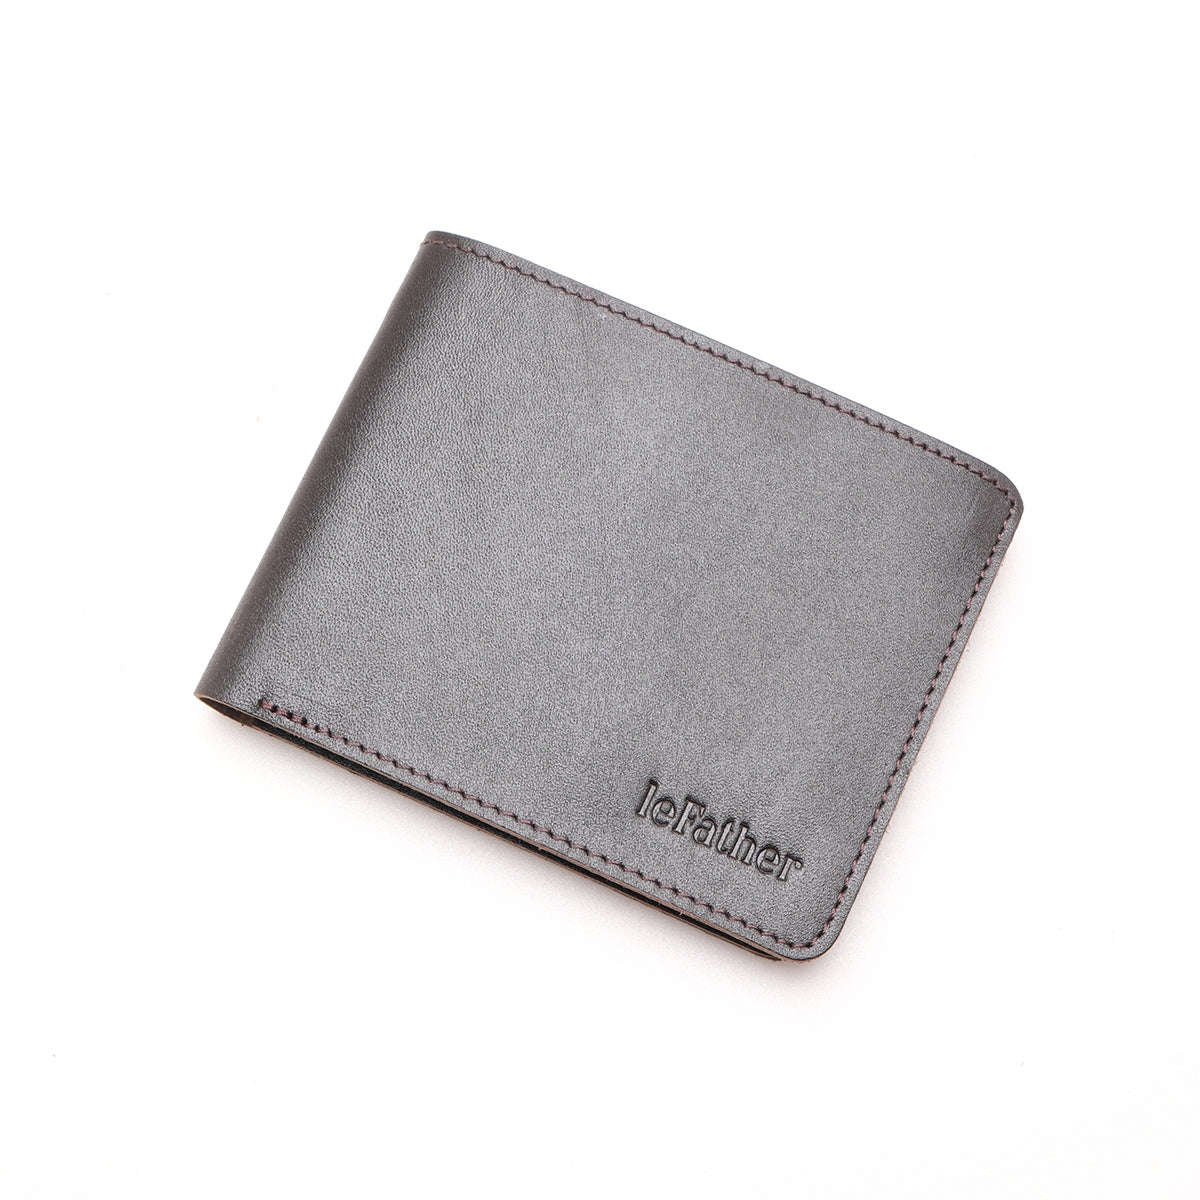 Genuine Leather Men's Wallet - PREMIUM This Wallet Is Made Of Durable, High Quality Genuine Leather. Only Wholesale! Made In Turkey ✓ Private Label ✓ Custom Design ✓ Contact Us For All Your Questions